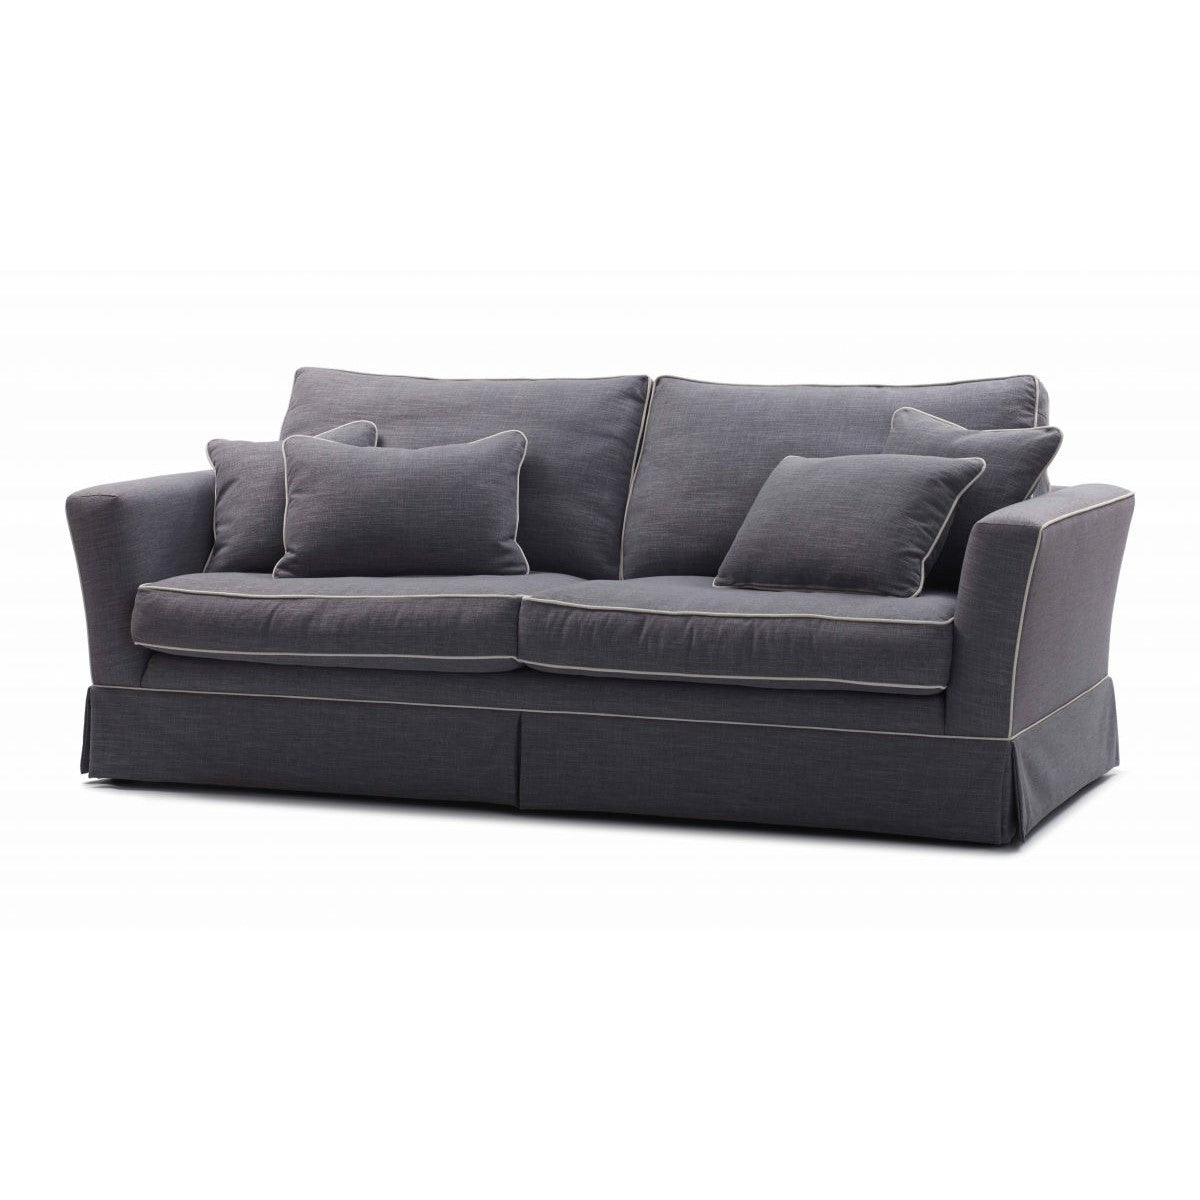 Carter Loose Cover Sofa by Molmic available from Make Your House A Home, Furniture Store located in Bendigo, Victoria. Australian Made in Melbourne.